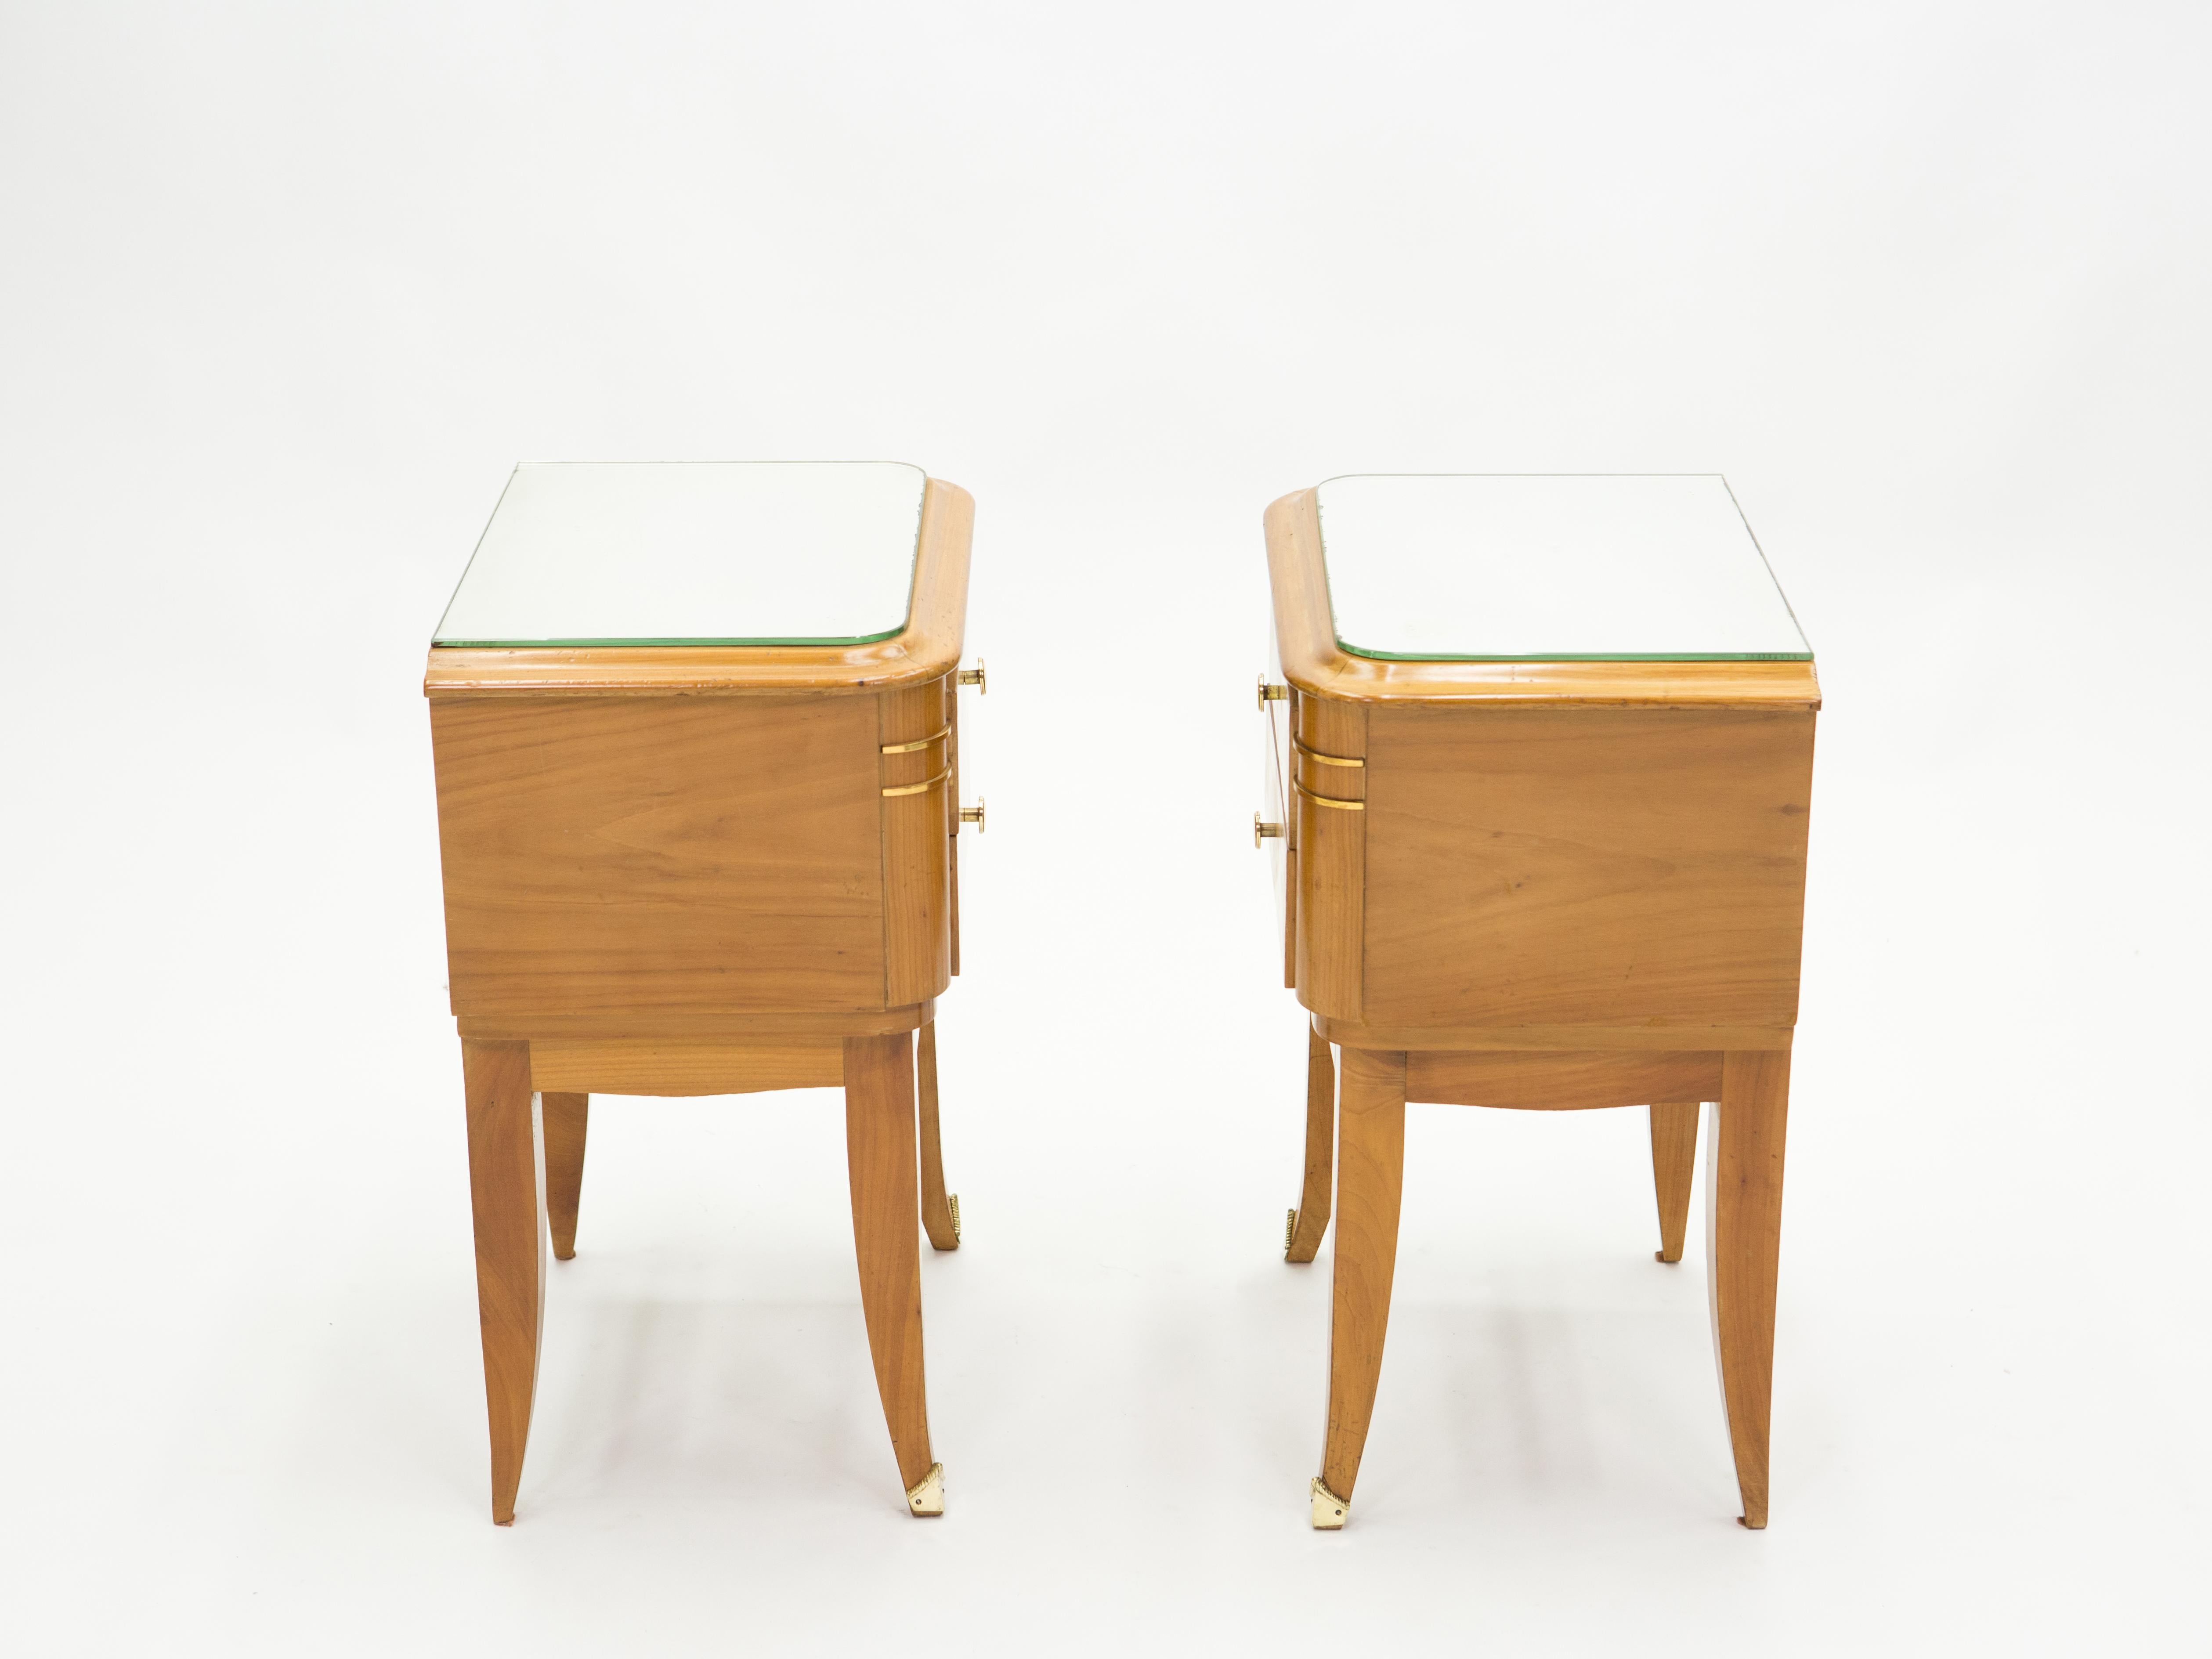 Late 20th Century French Sycamore Brass Nightstands 2 Drawers by Jean Pascaud, 1940s For Sale